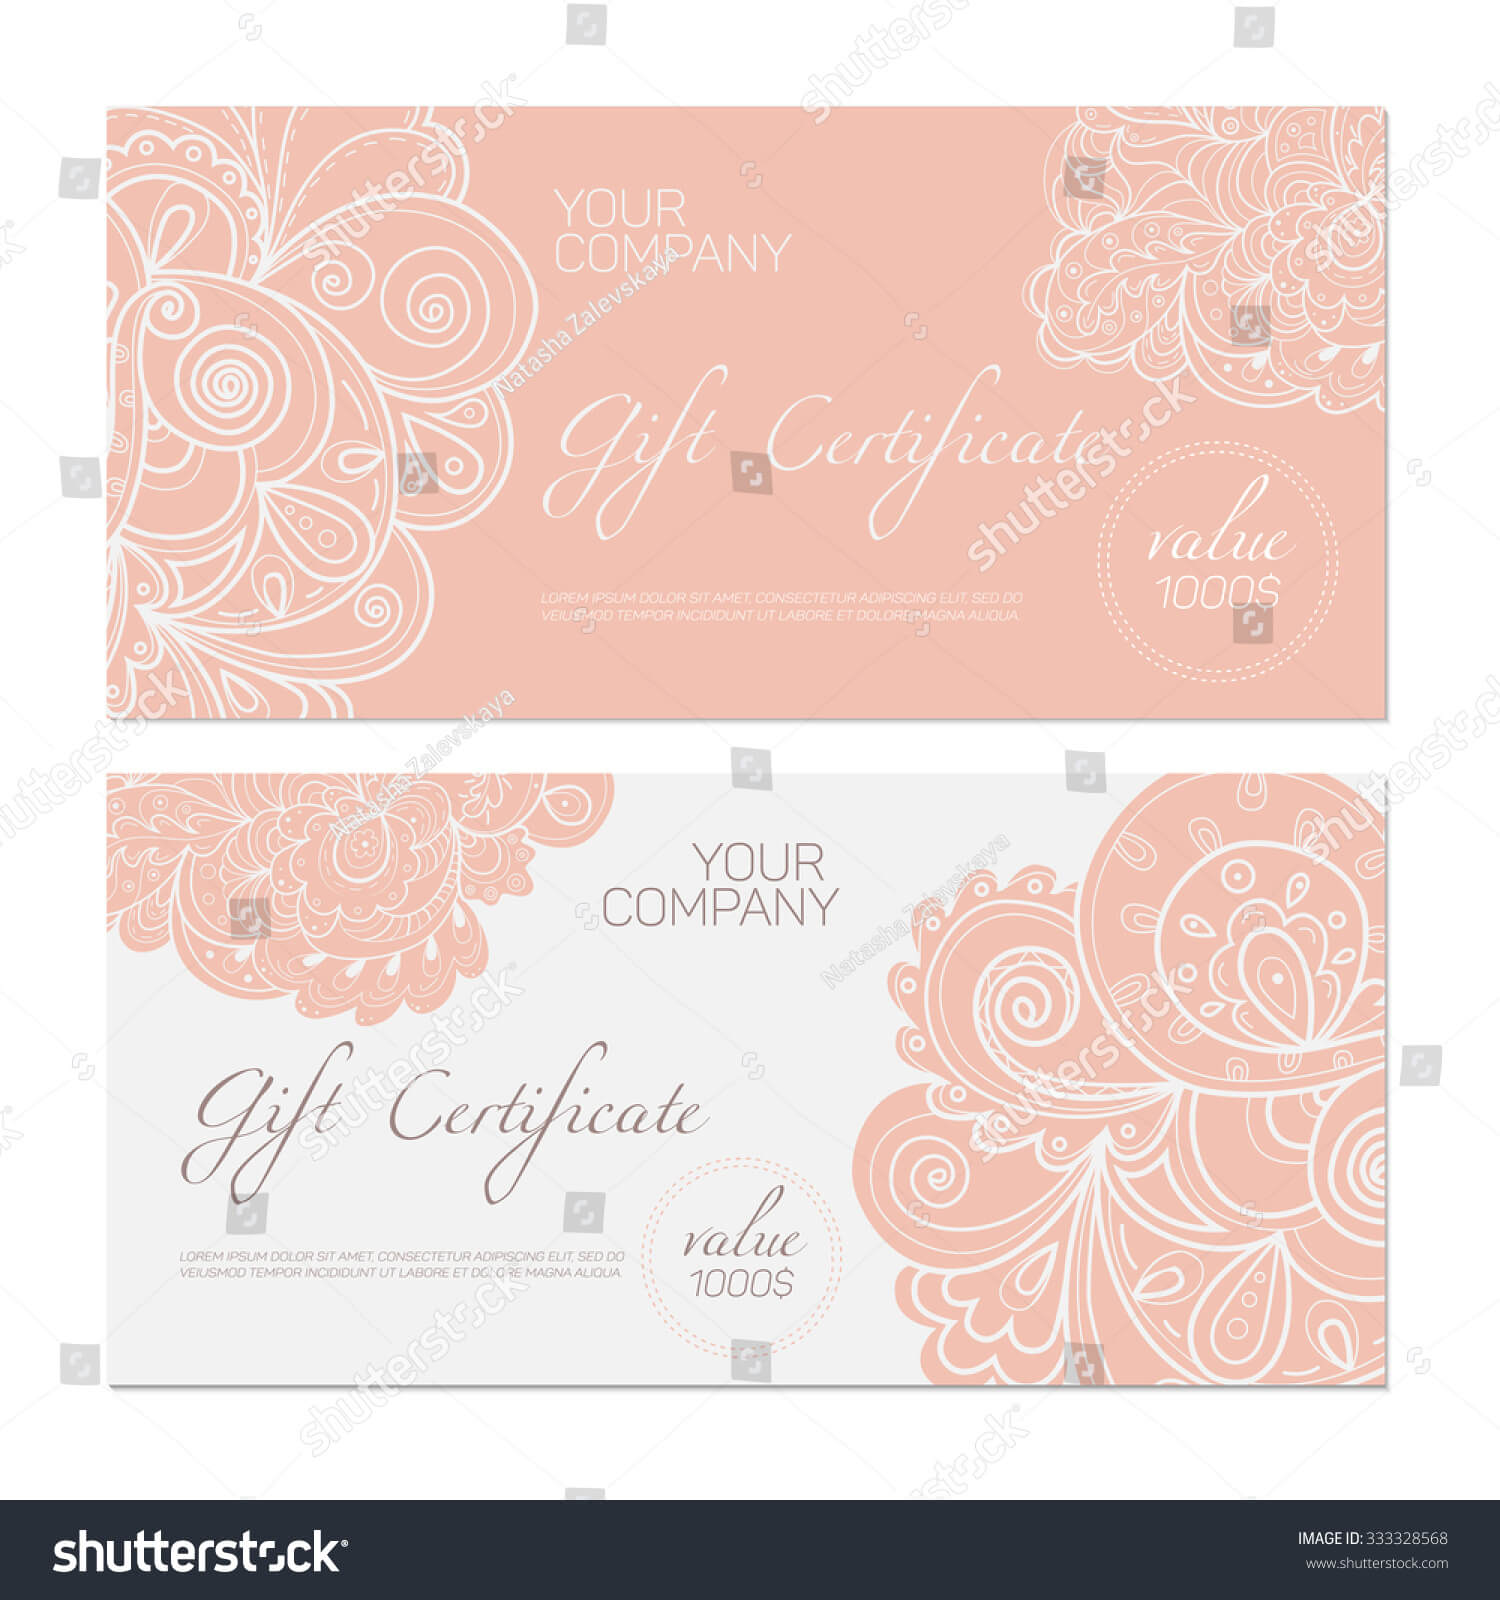 Elegant Gift Certificate Template Abstract Ornamental Stock Pertaining To Elegant Gift Certificate Template